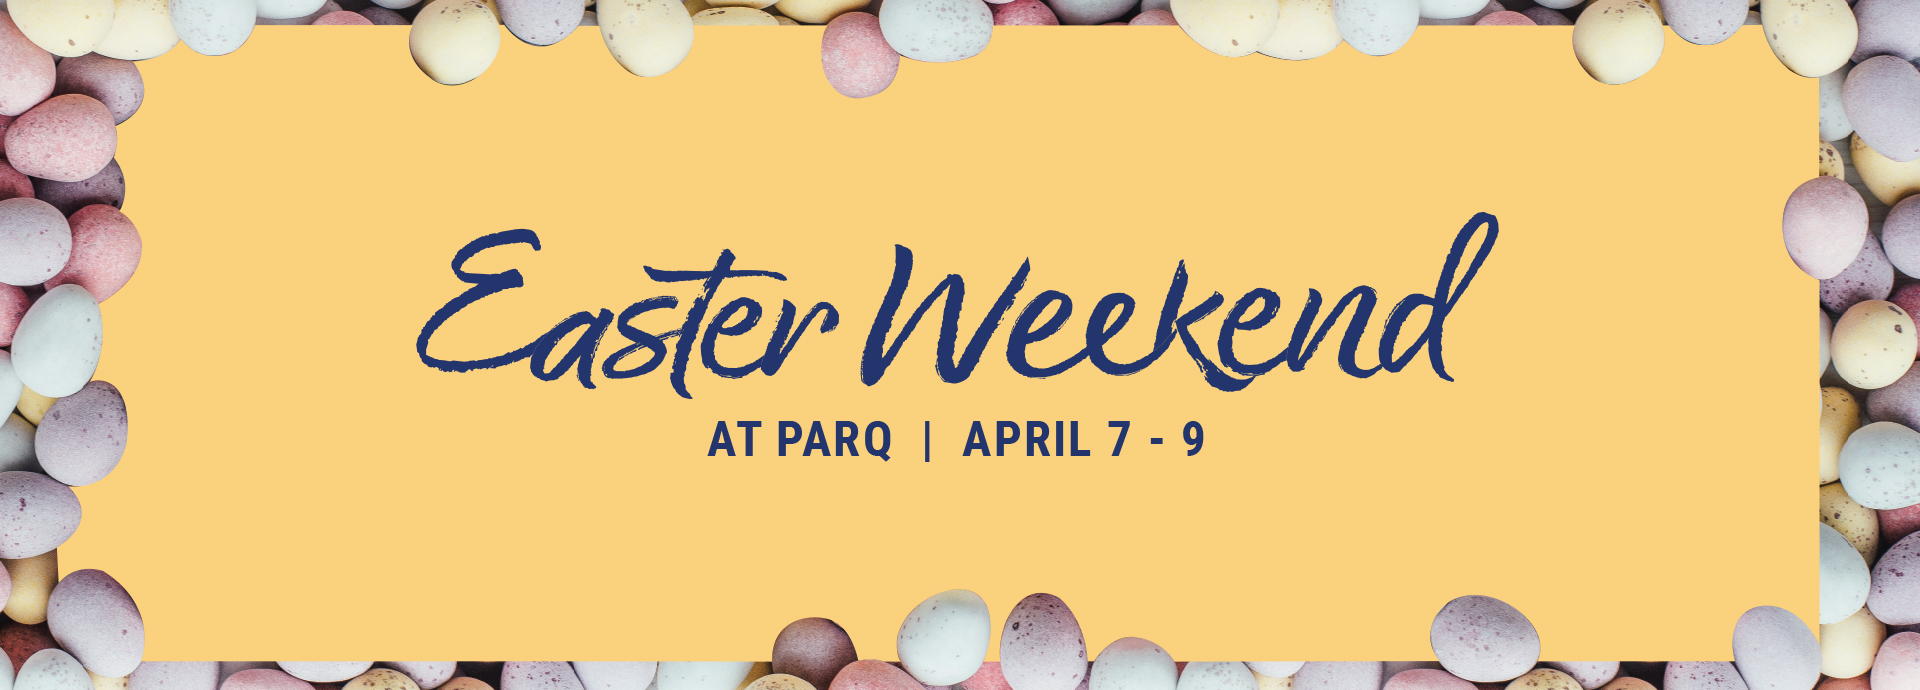 Easter Weekend Parq Vancouver 5371